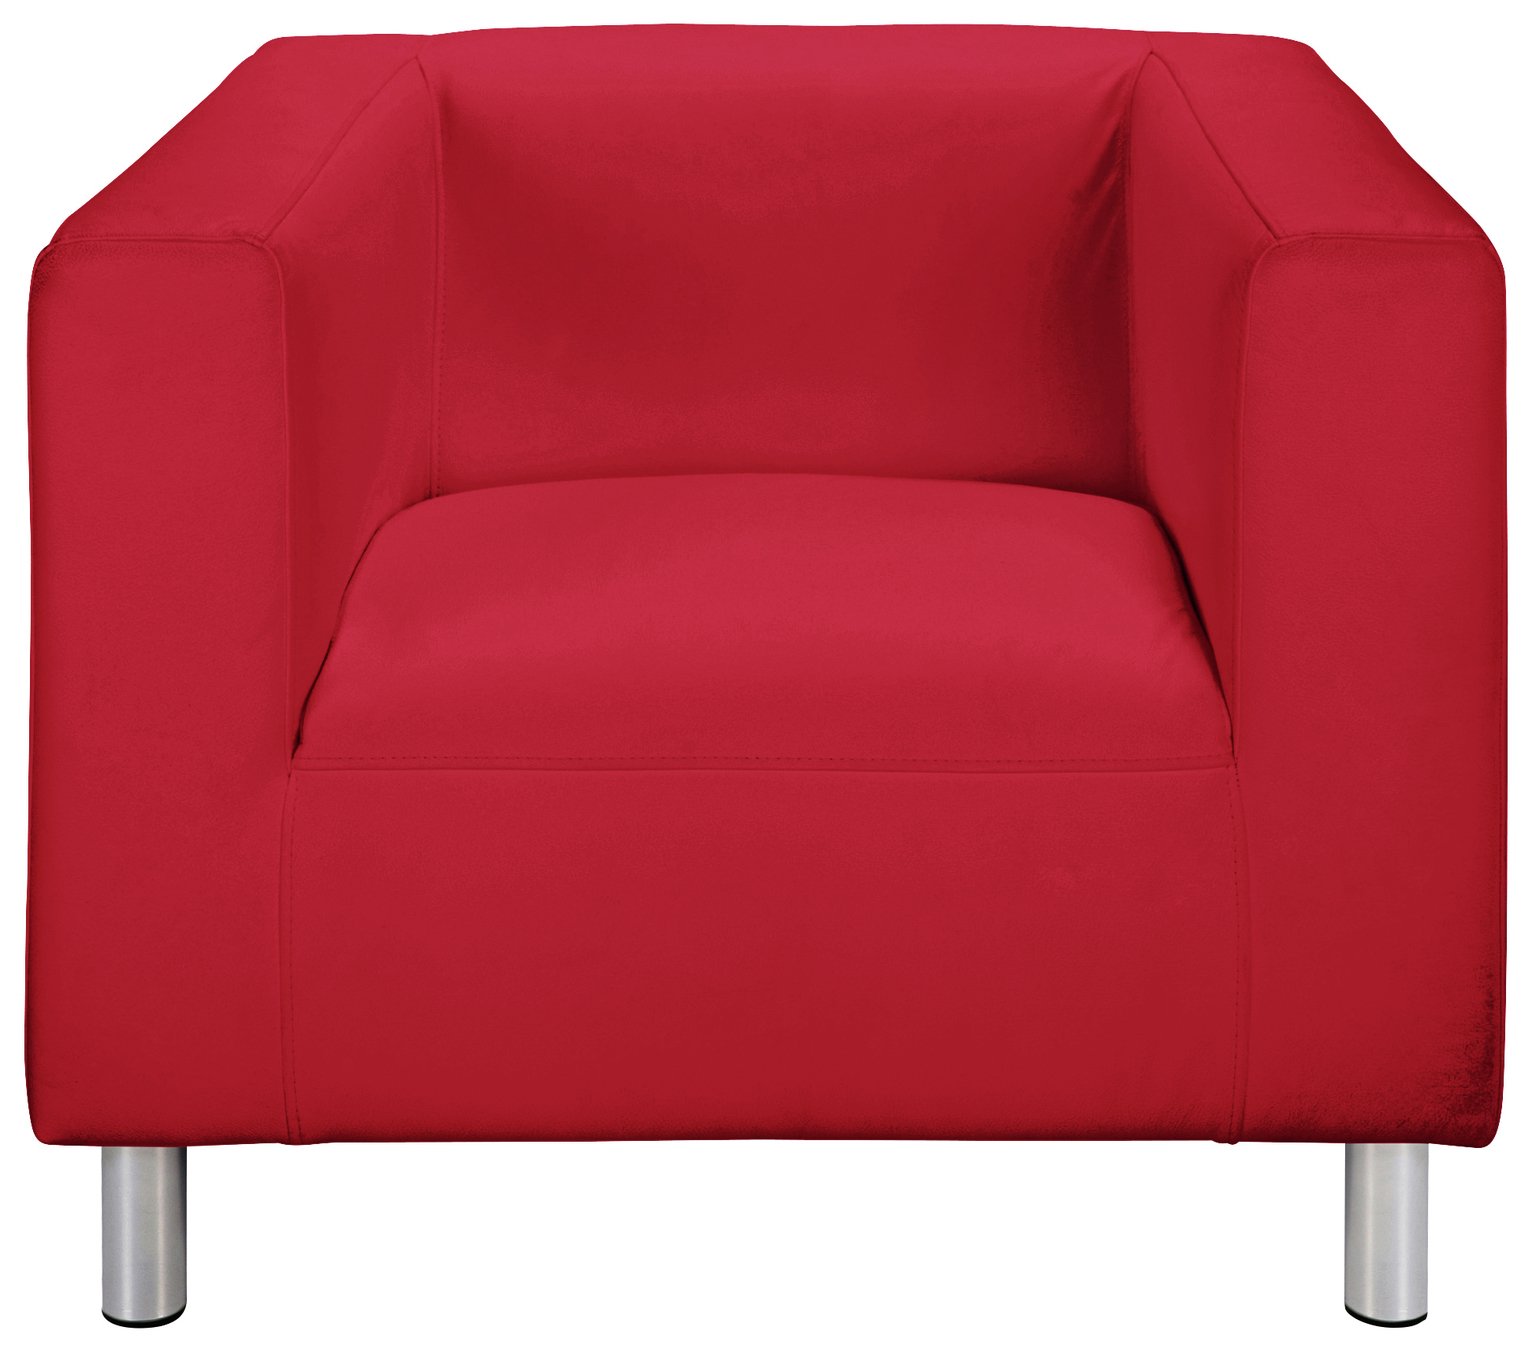 Argos Home Moda Faux Leather Armchair - Red